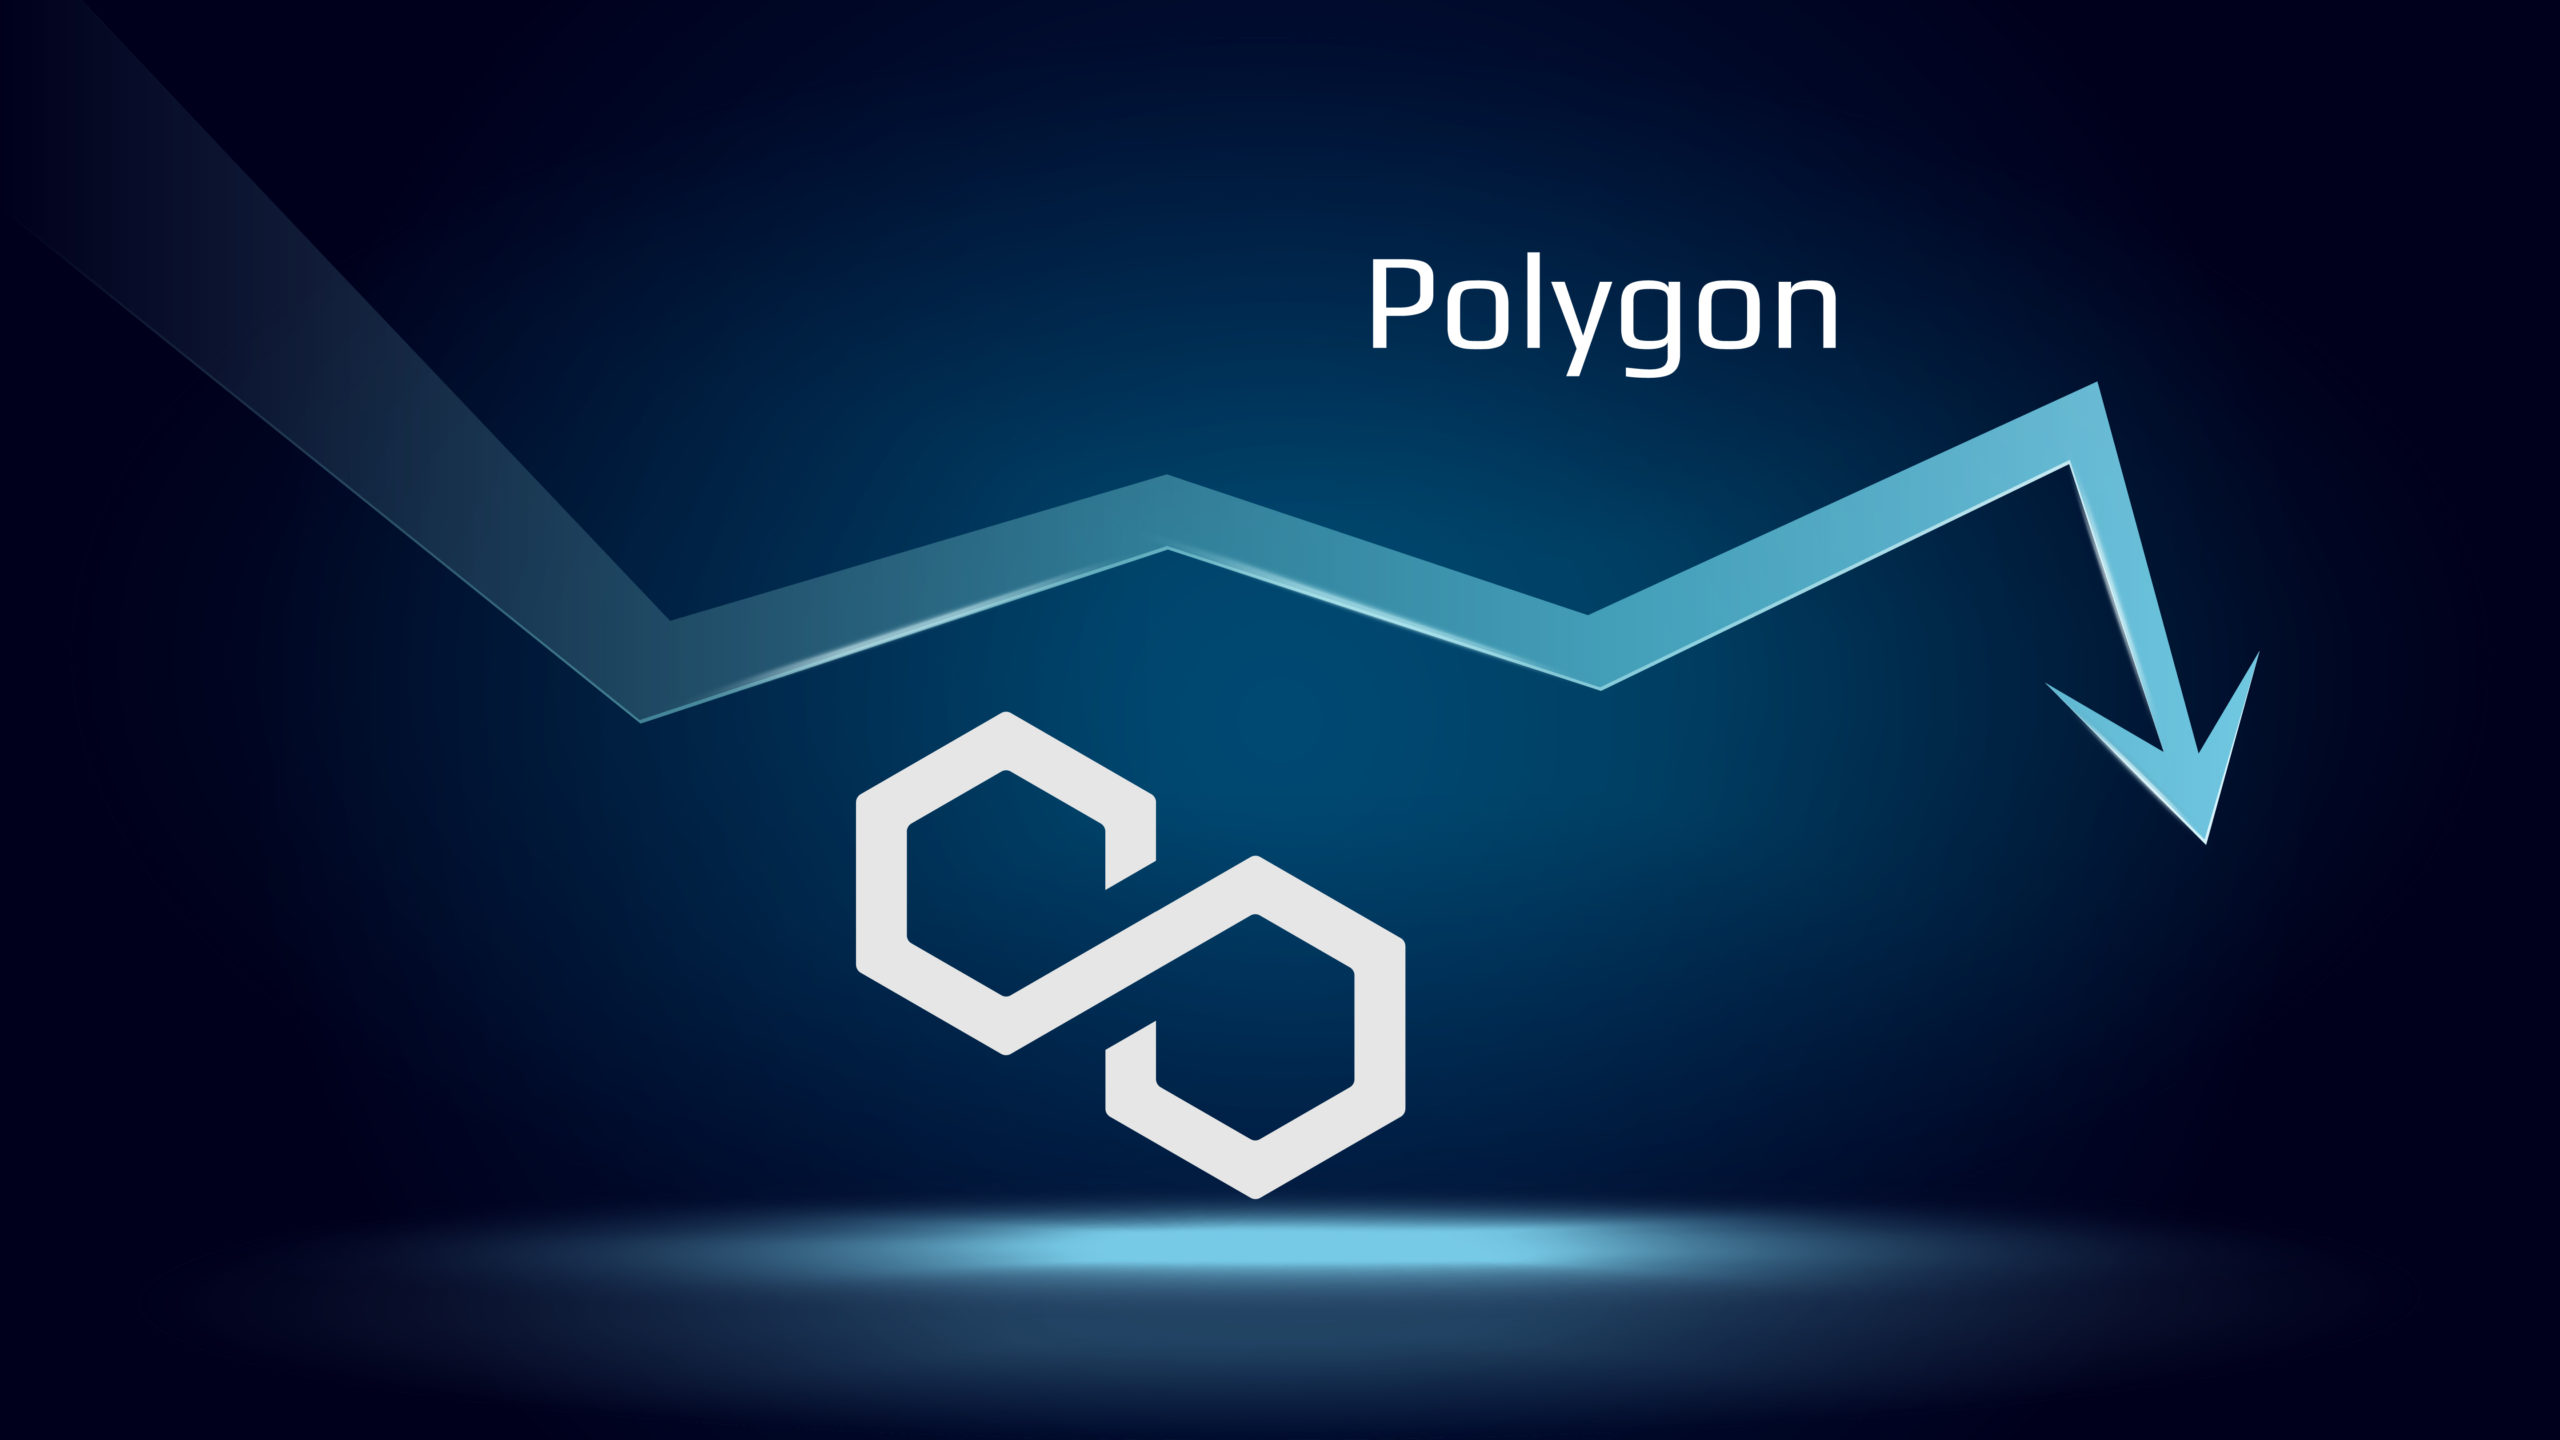 How to Start Polygon Investing